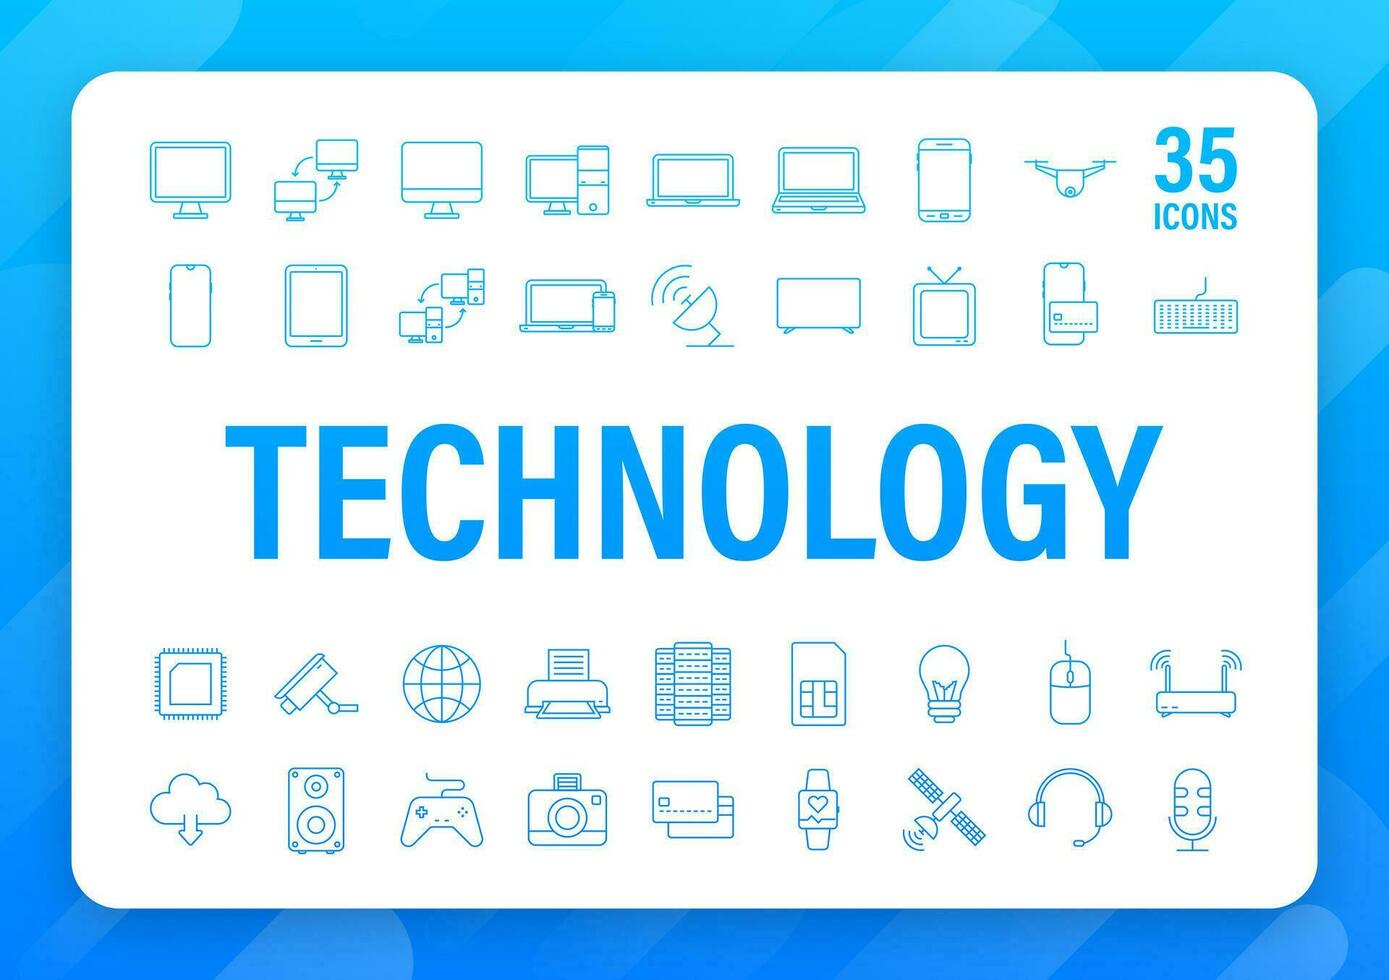 Technology icon on white background. Information technology. Digital communication. Device icon. Global network connection. Vector stock illustration